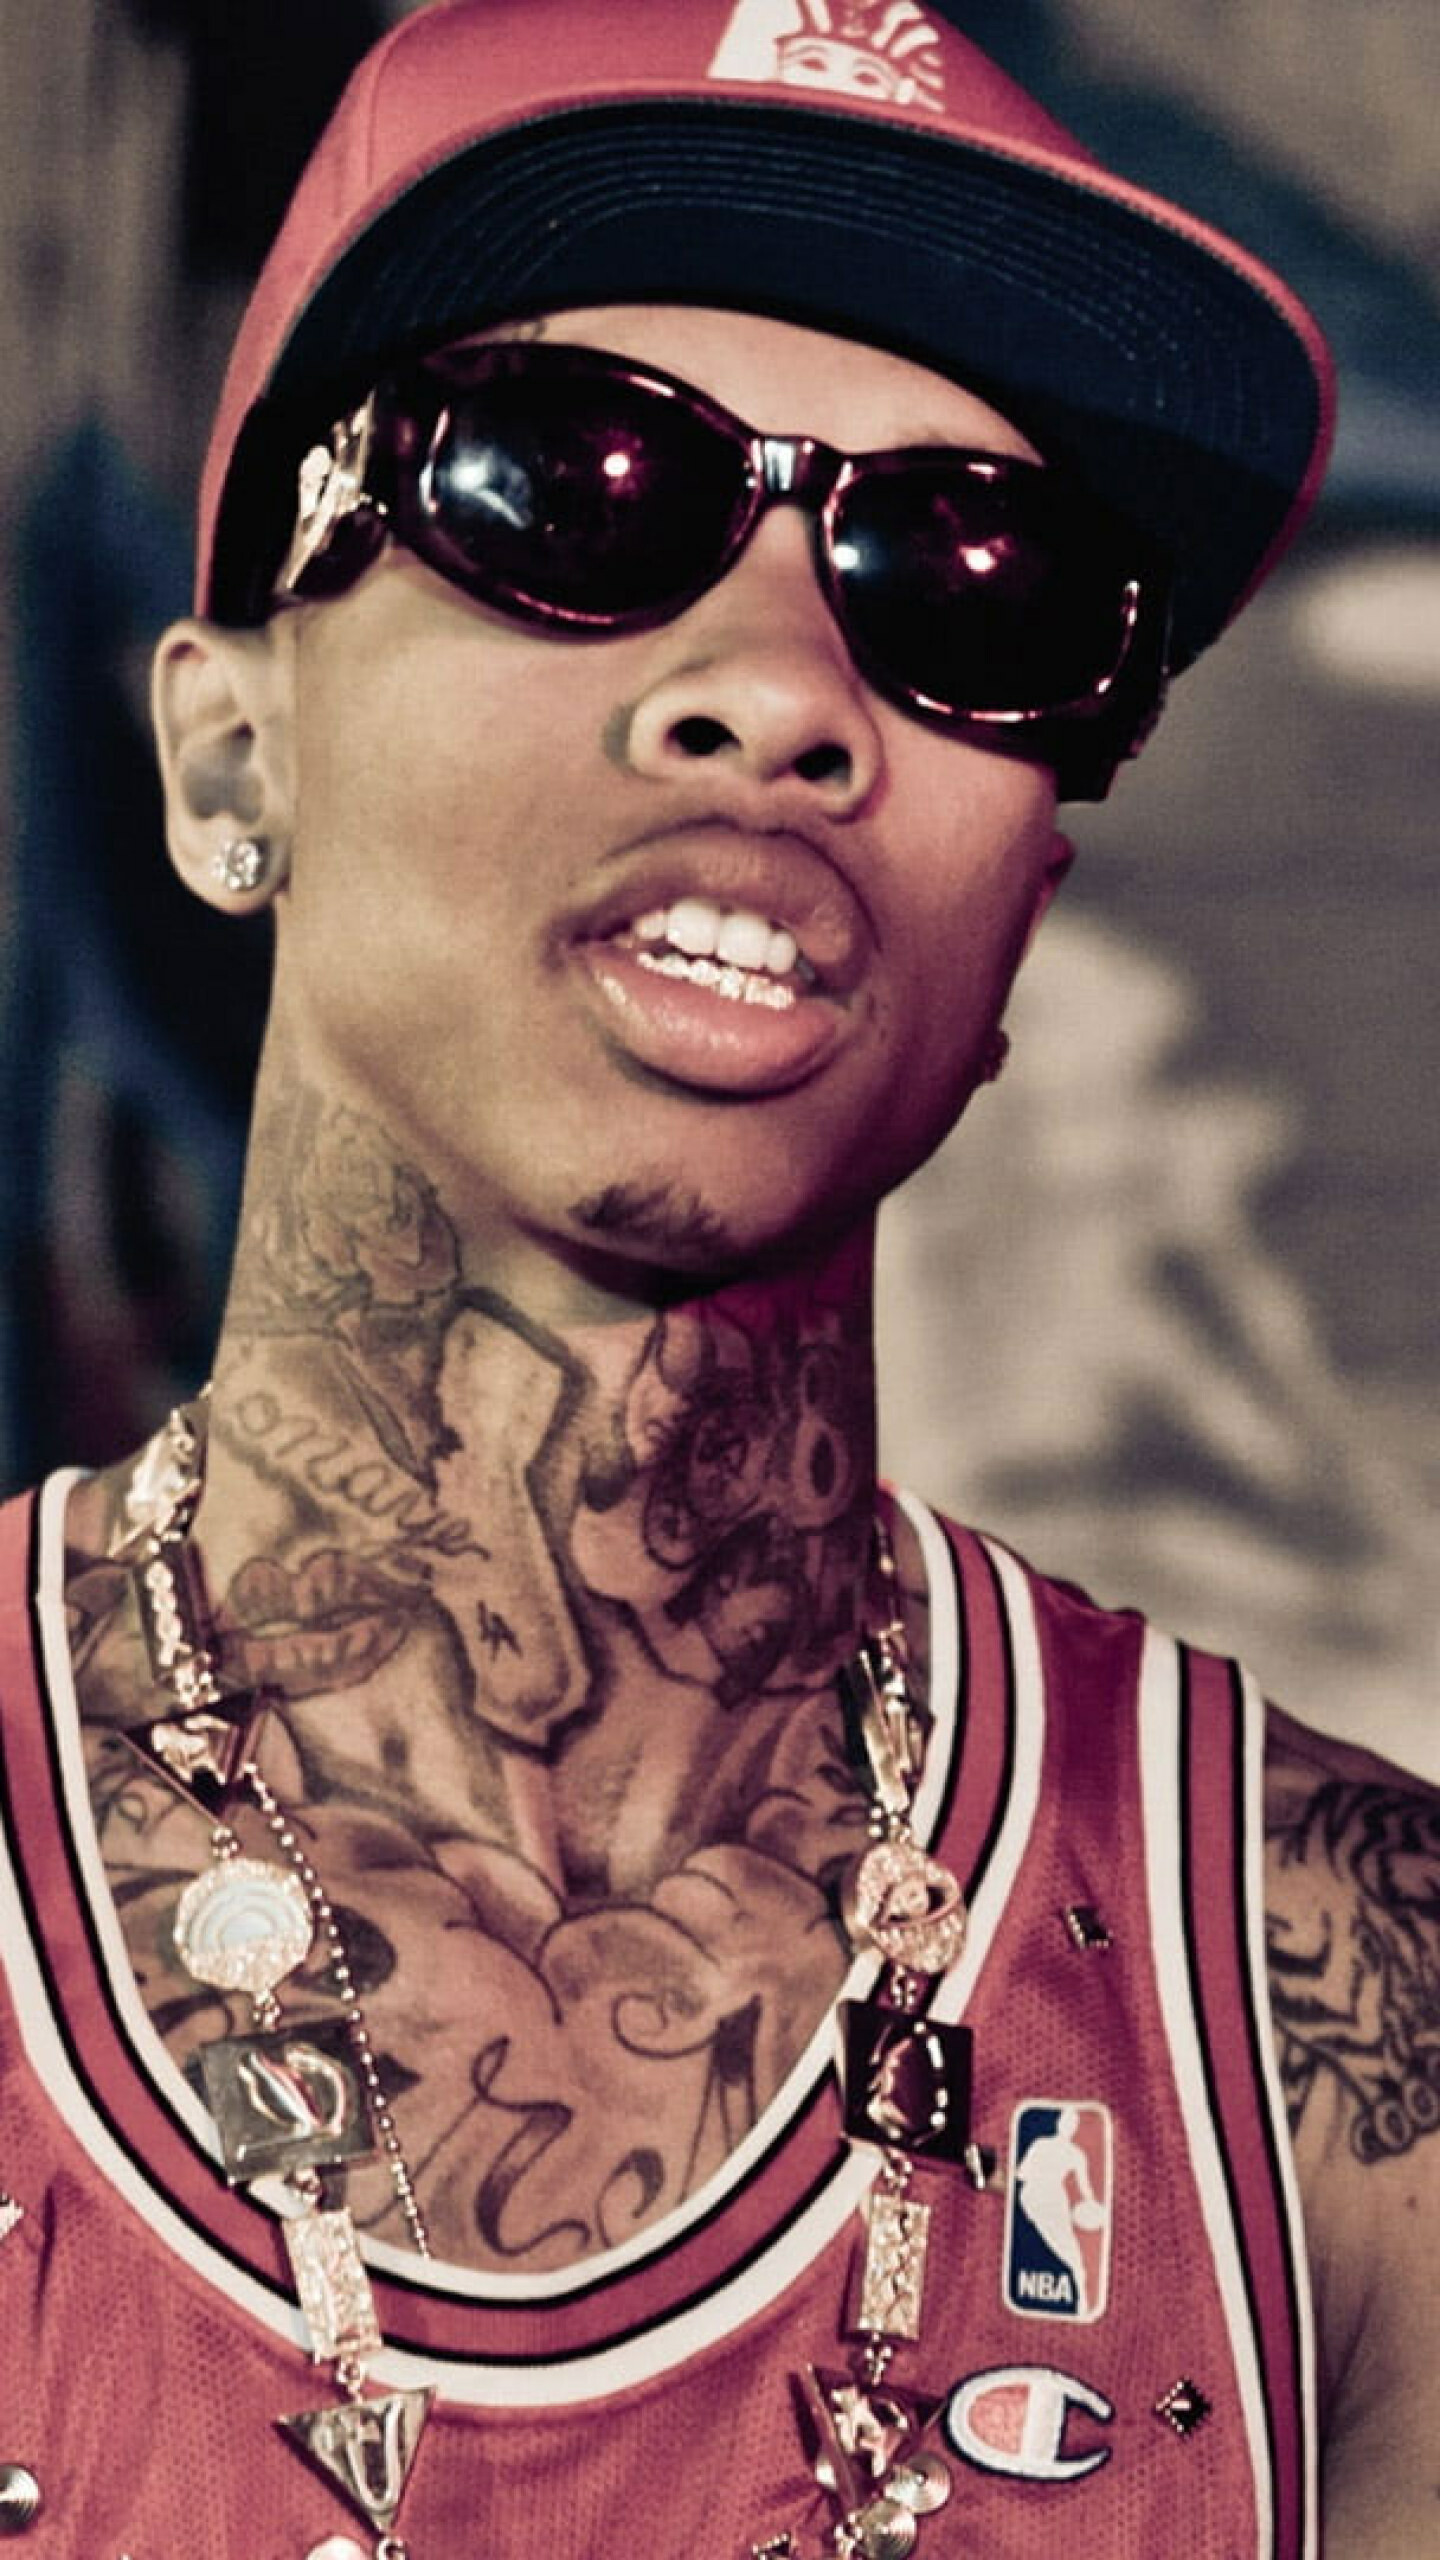 Tyga: "Rack City" has peaked at number 7 on the Billboard Hot 100, Rapper. 1440x2560 HD Wallpaper.